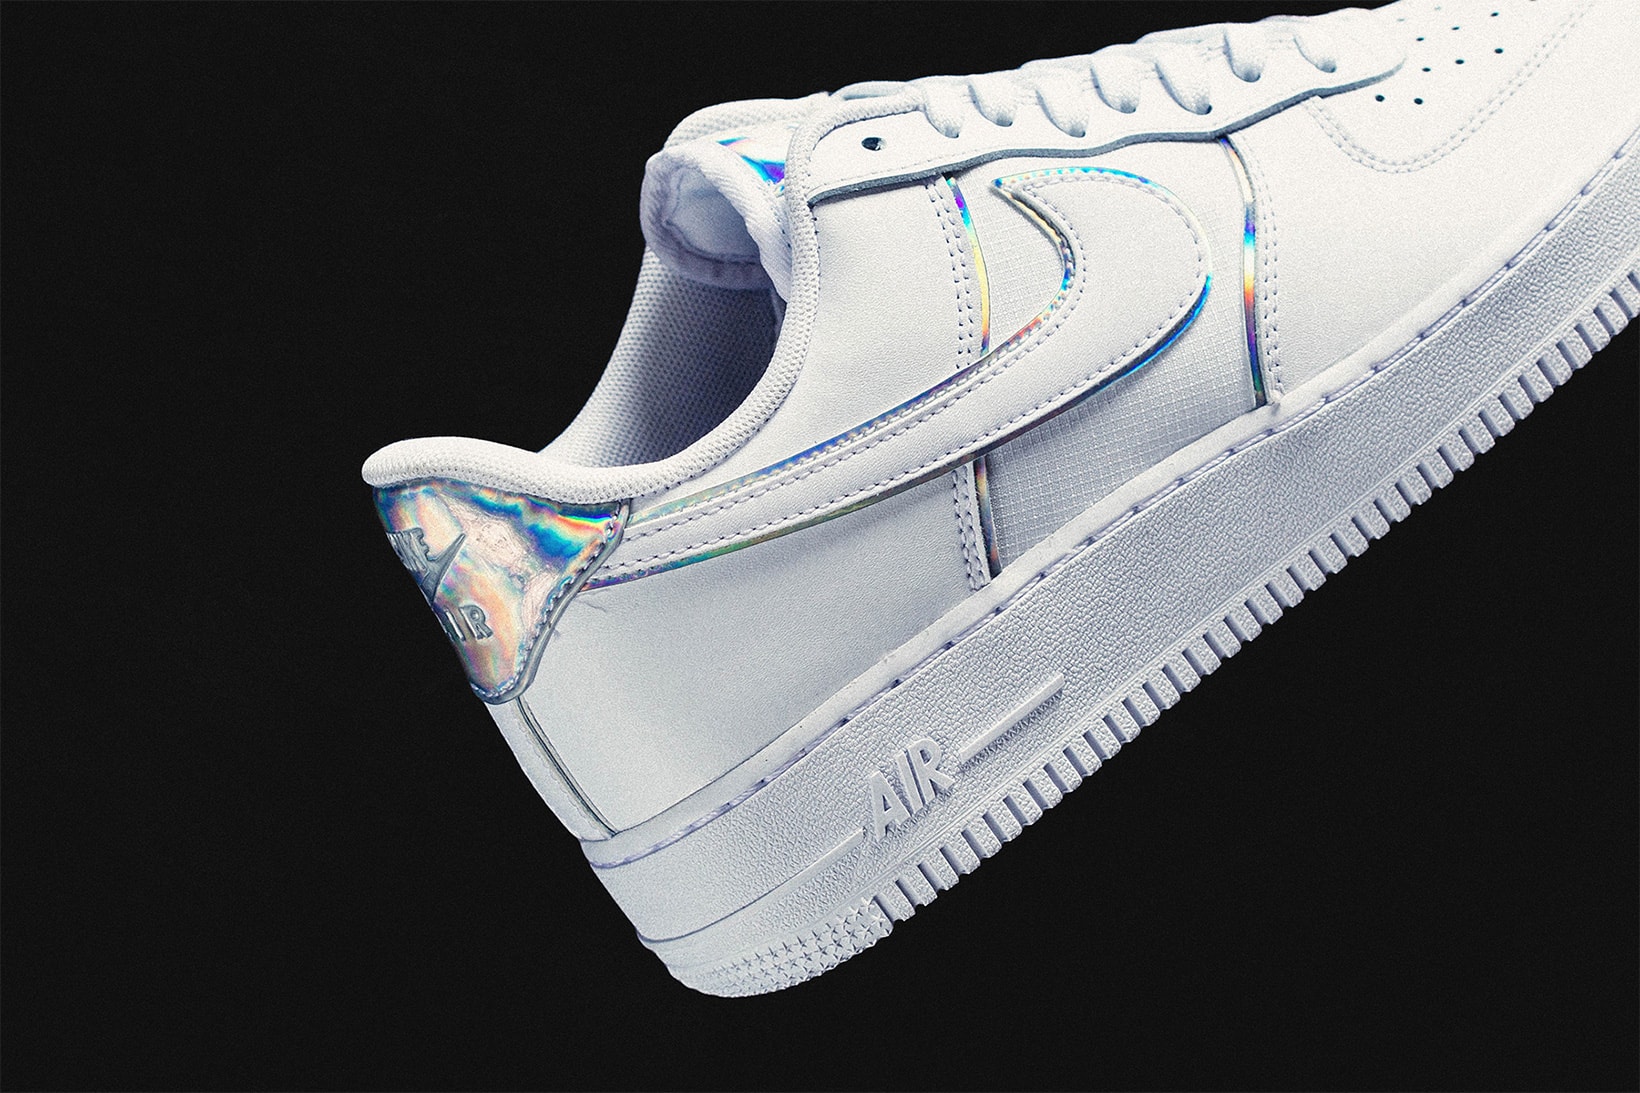 nike air force 1 07 lv8 white iridescent details leather